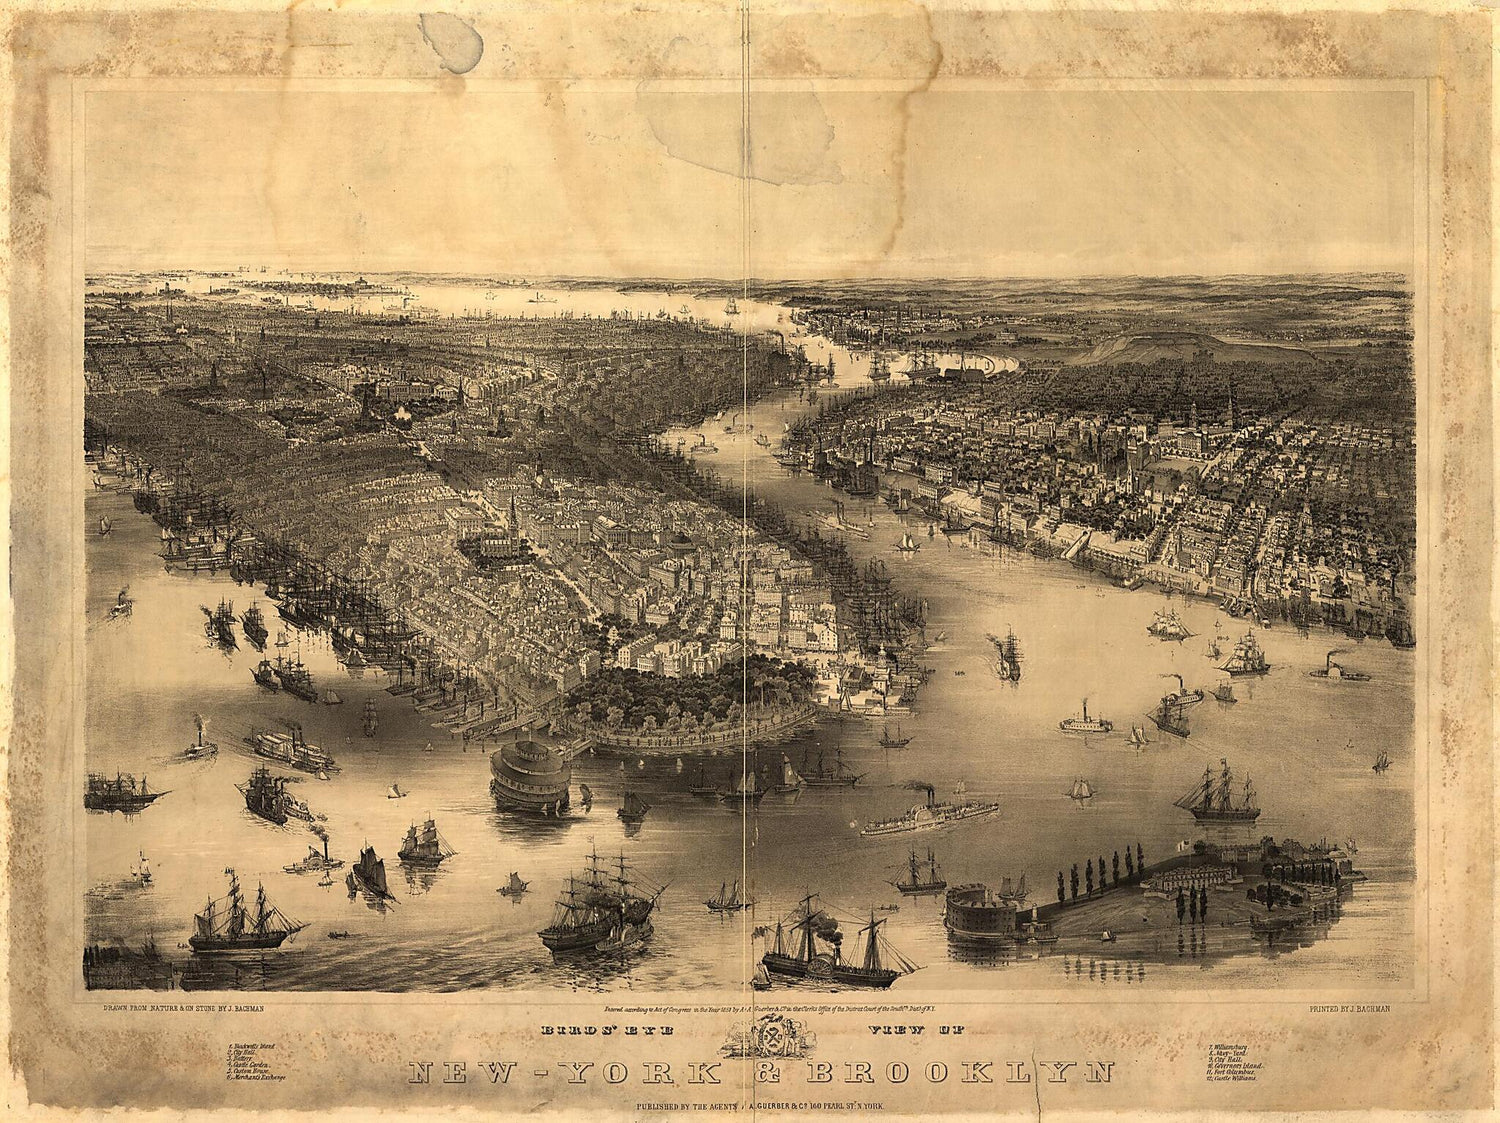 This old map of York &amp; Brooklyn / Drawn from Nature &amp; On Stone by J. Bachmann from 1851 was created by John Bachmann in 1851